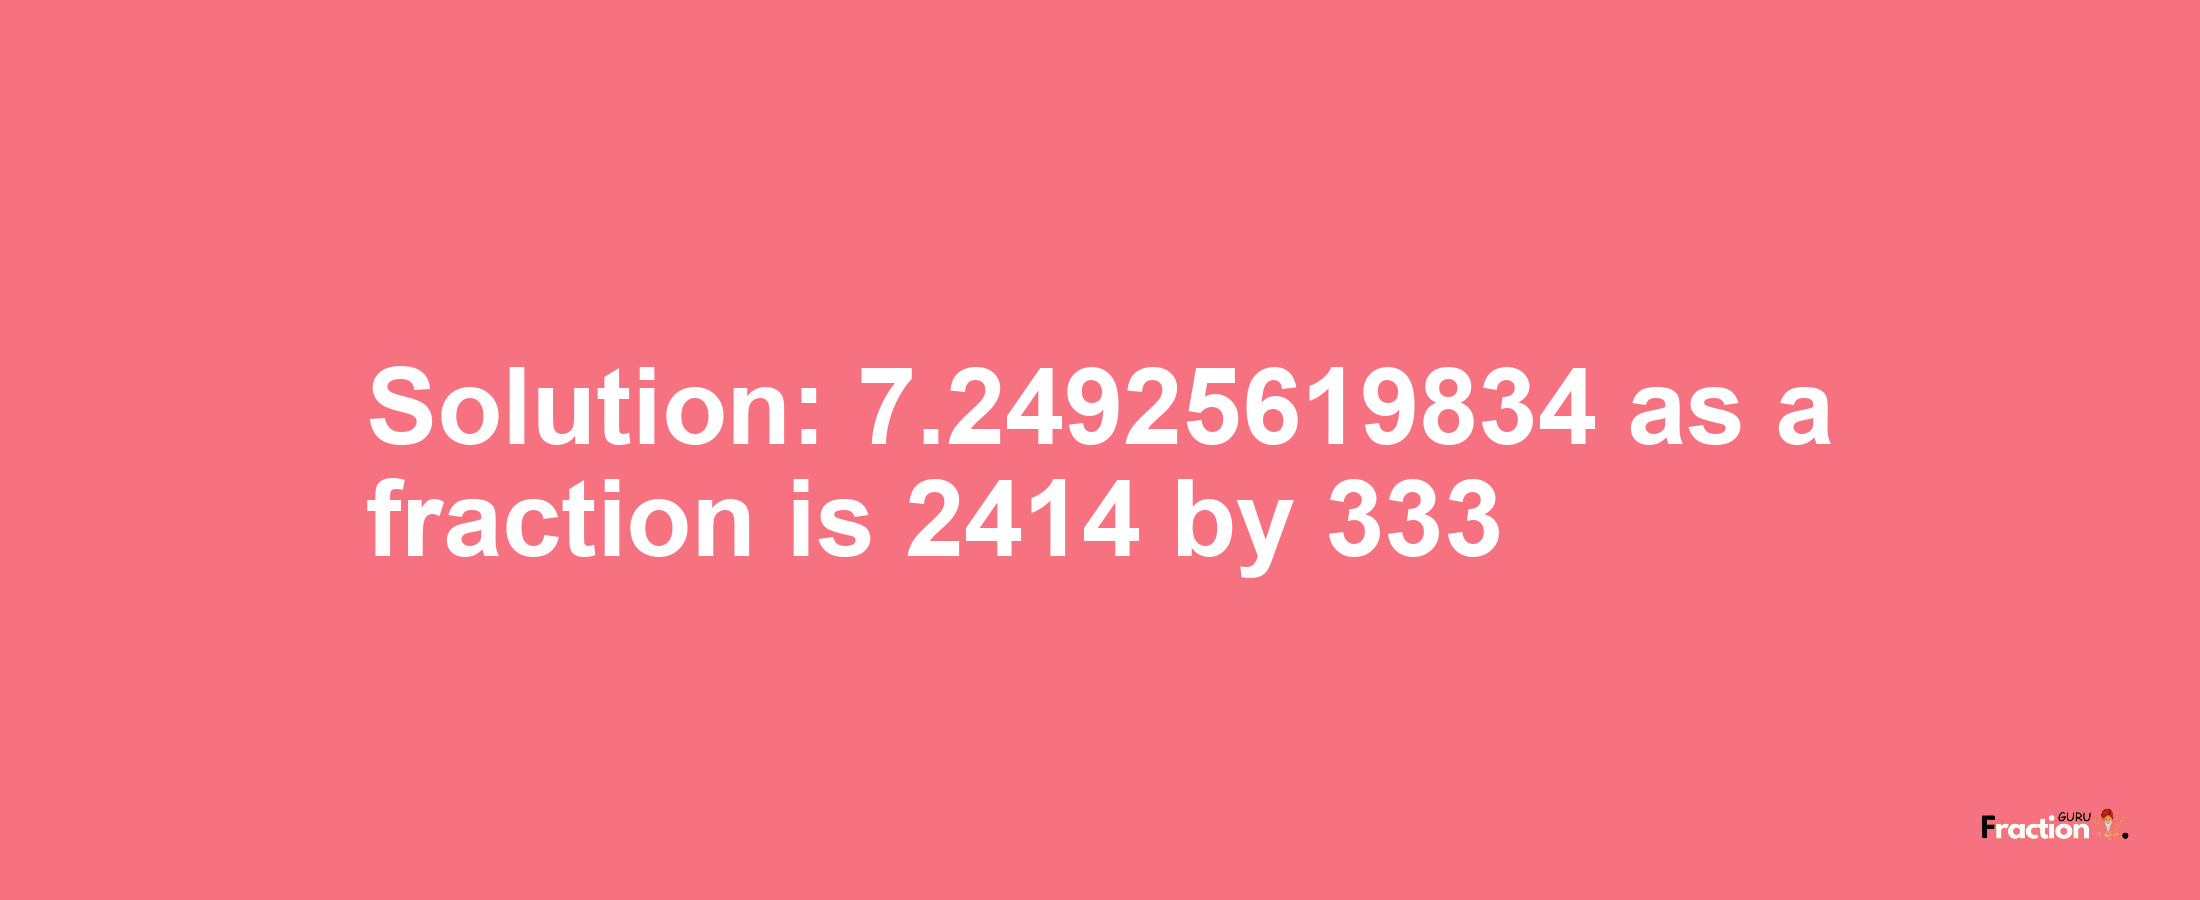 Solution:7.24925619834 as a fraction is 2414/333